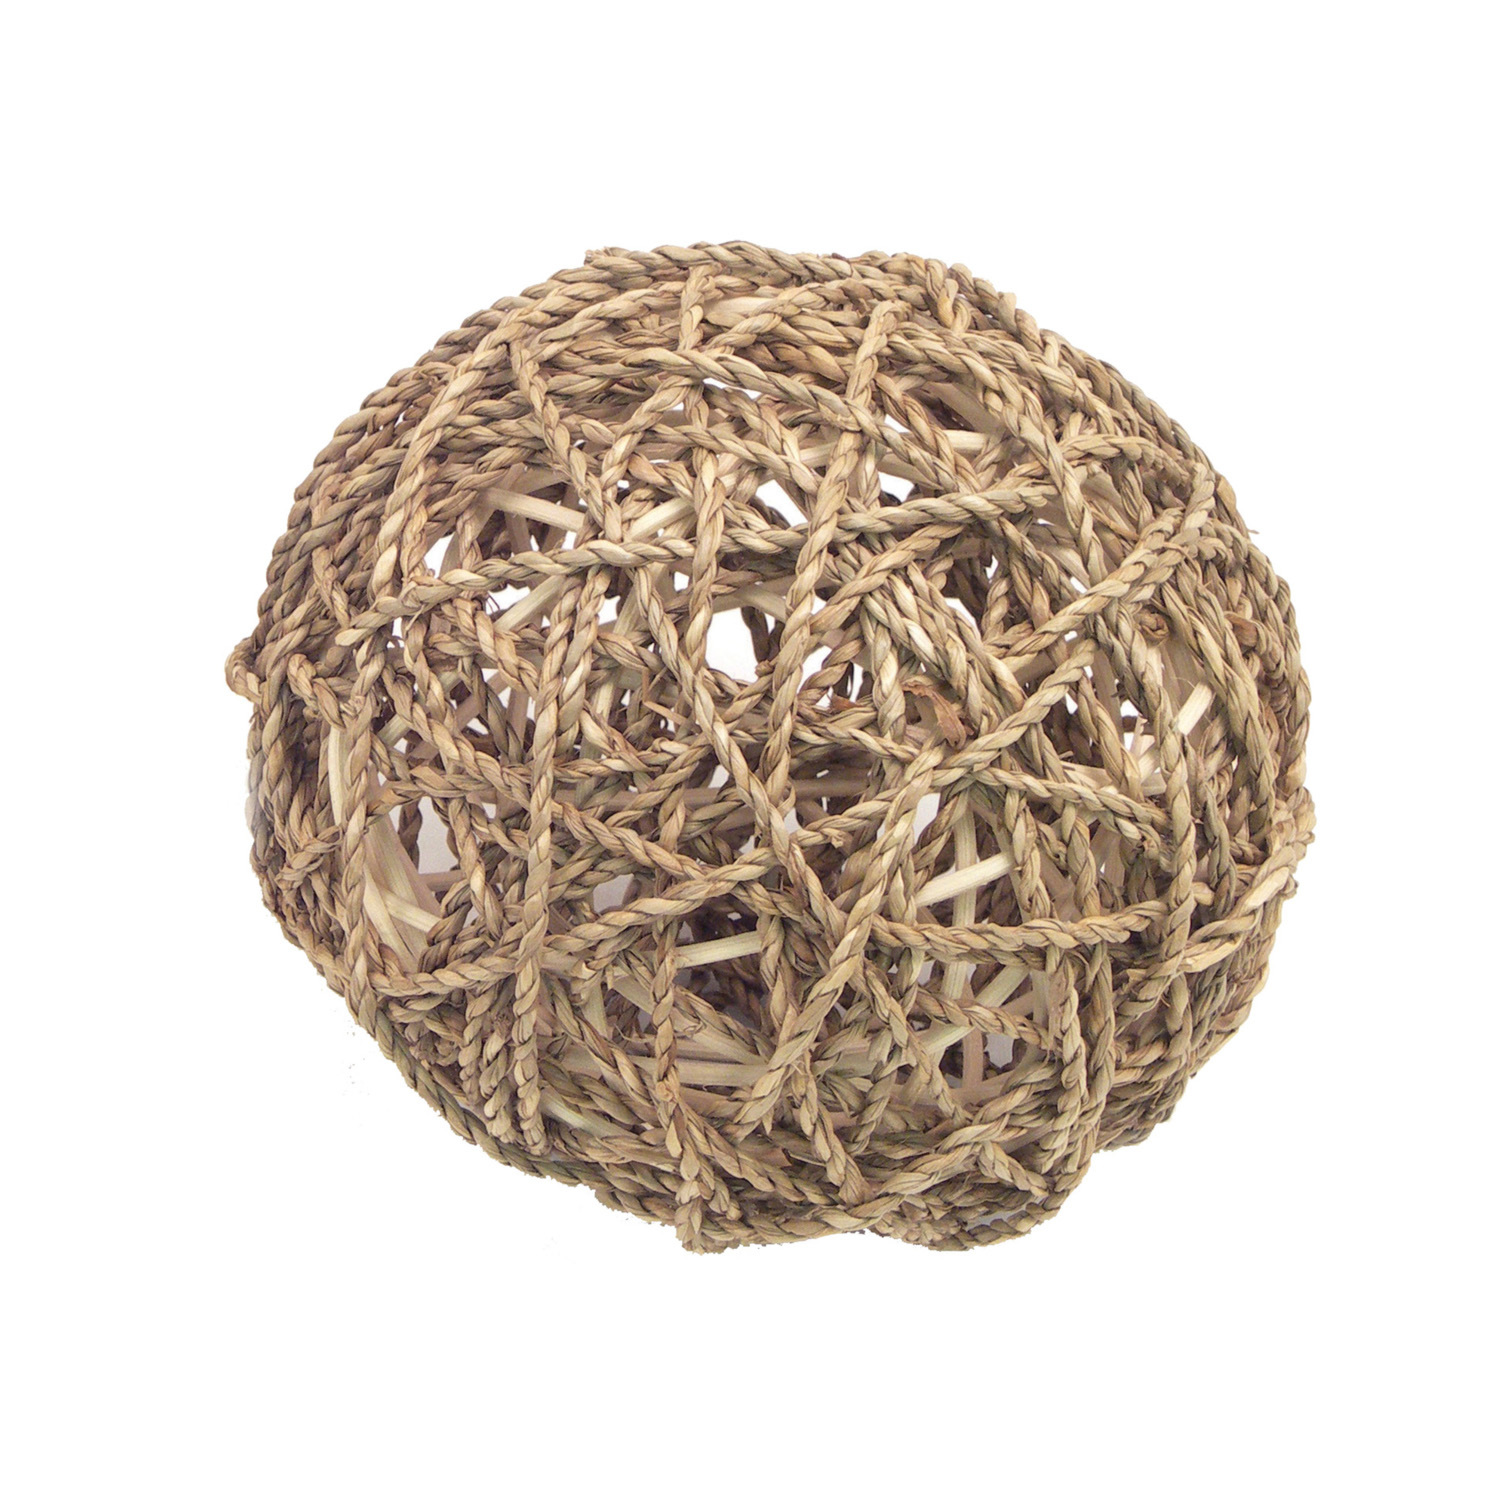 Rosewood Small Animal Natural Seagrass Fun Ball Toy Image